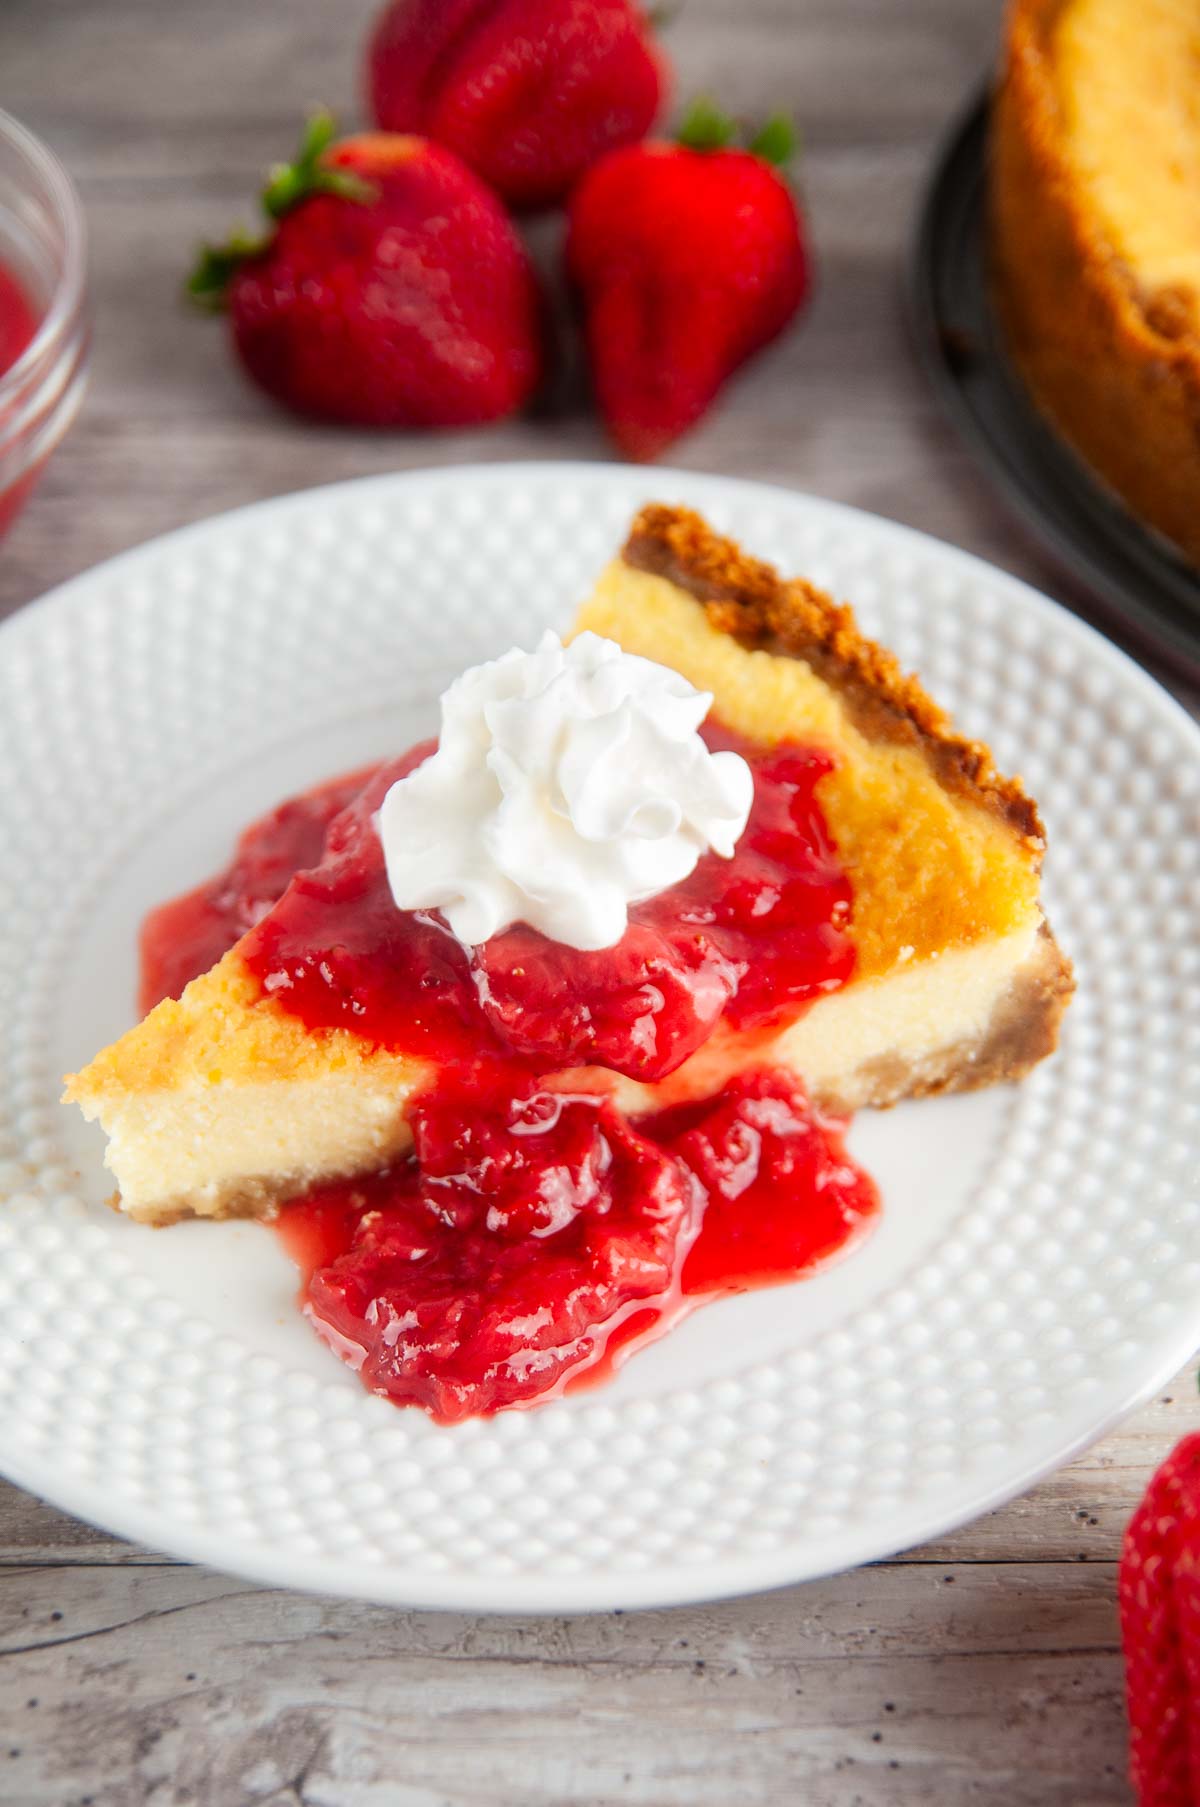 Learn how to make strawberry topping for cheesecake with this easy recipe. With only 3 ingredients, you'll be whipping this up and spooning it onto cheesecakes, other desserts, and even on waffles and pancakes all the time!